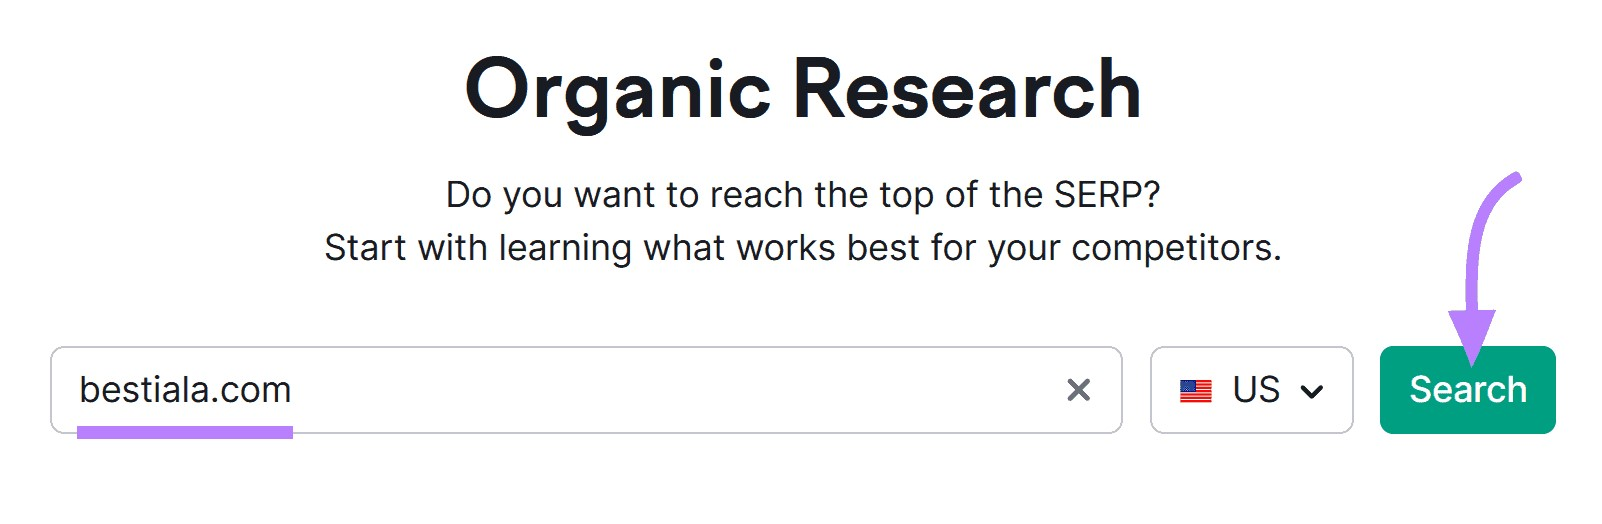 "bestiala.com" entered into the Organic Research search bar